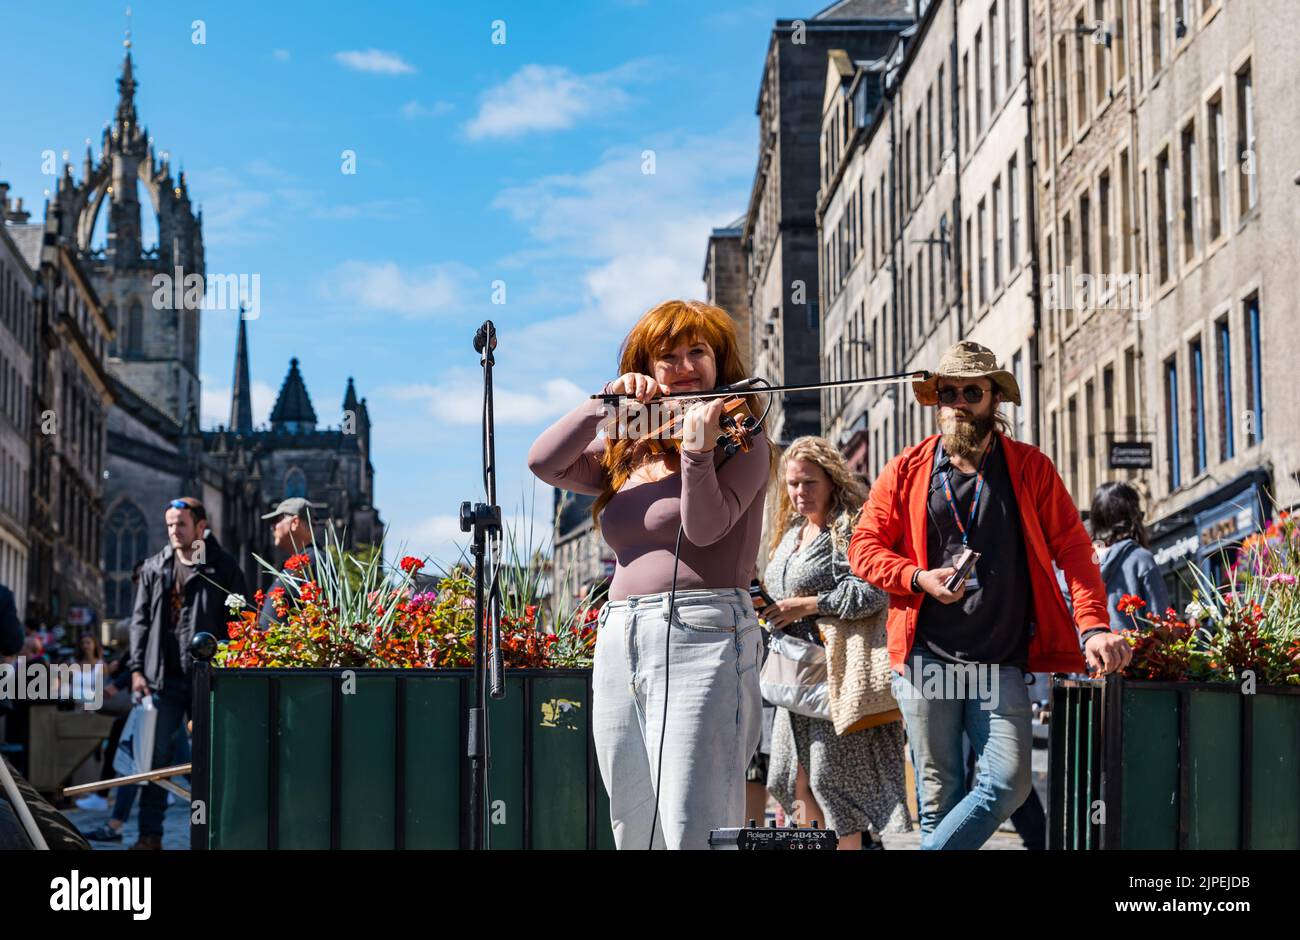 Royal Mile, Edinburgh, Scotland, UK, 17th August 2022. Performers on Royal Mile in the sunshine. Pictured: Credit: Meg Lagrande performing on the street playing the violin or fiddle as people walk past. Sally Anderson/Alamy Live News Stock Photo